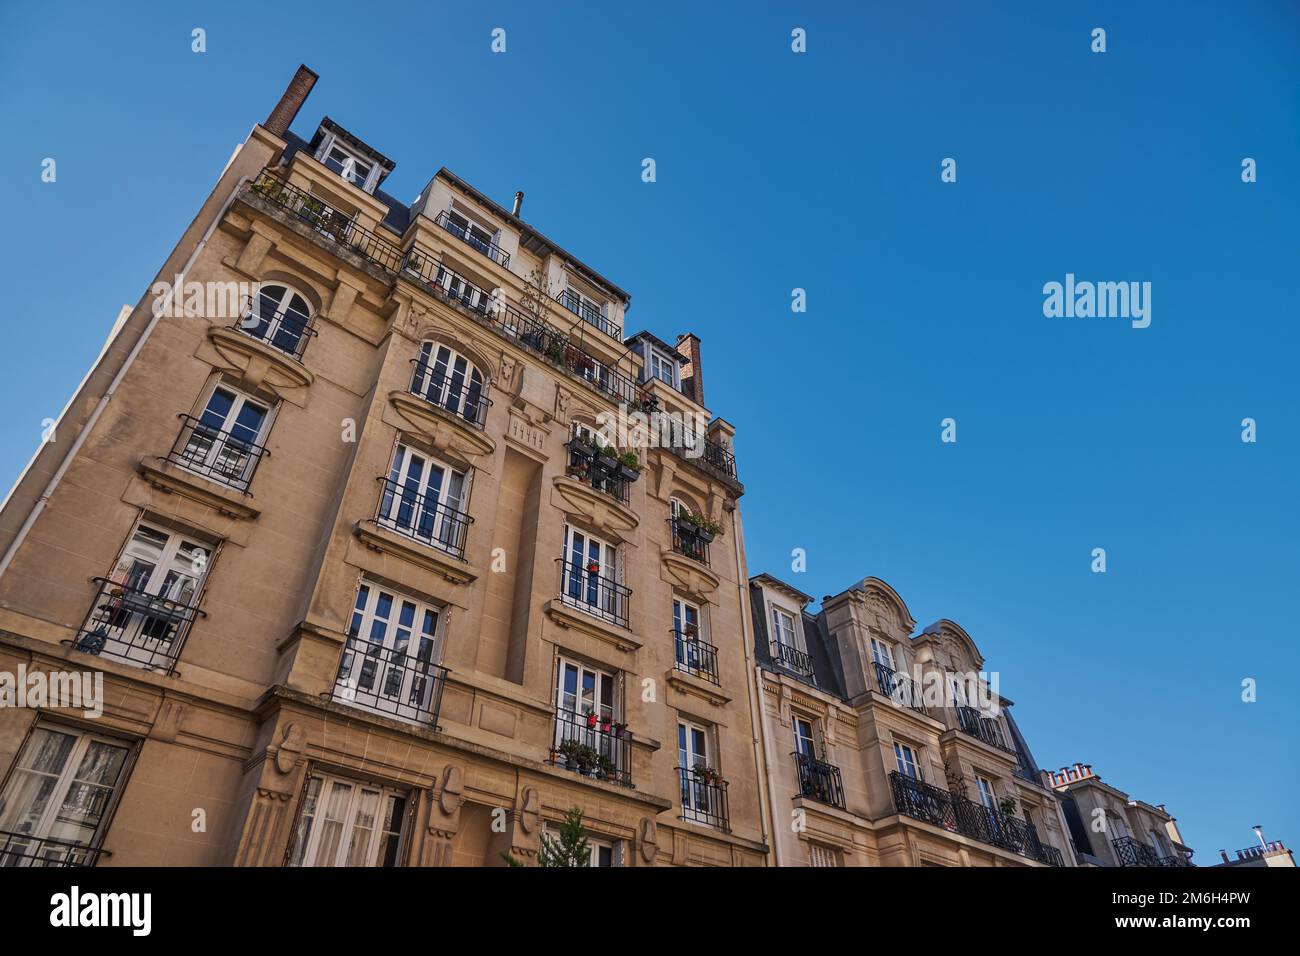 Traditional Parisian Residential Buildings in the Montmartre Area - Paris, France Stock Photo